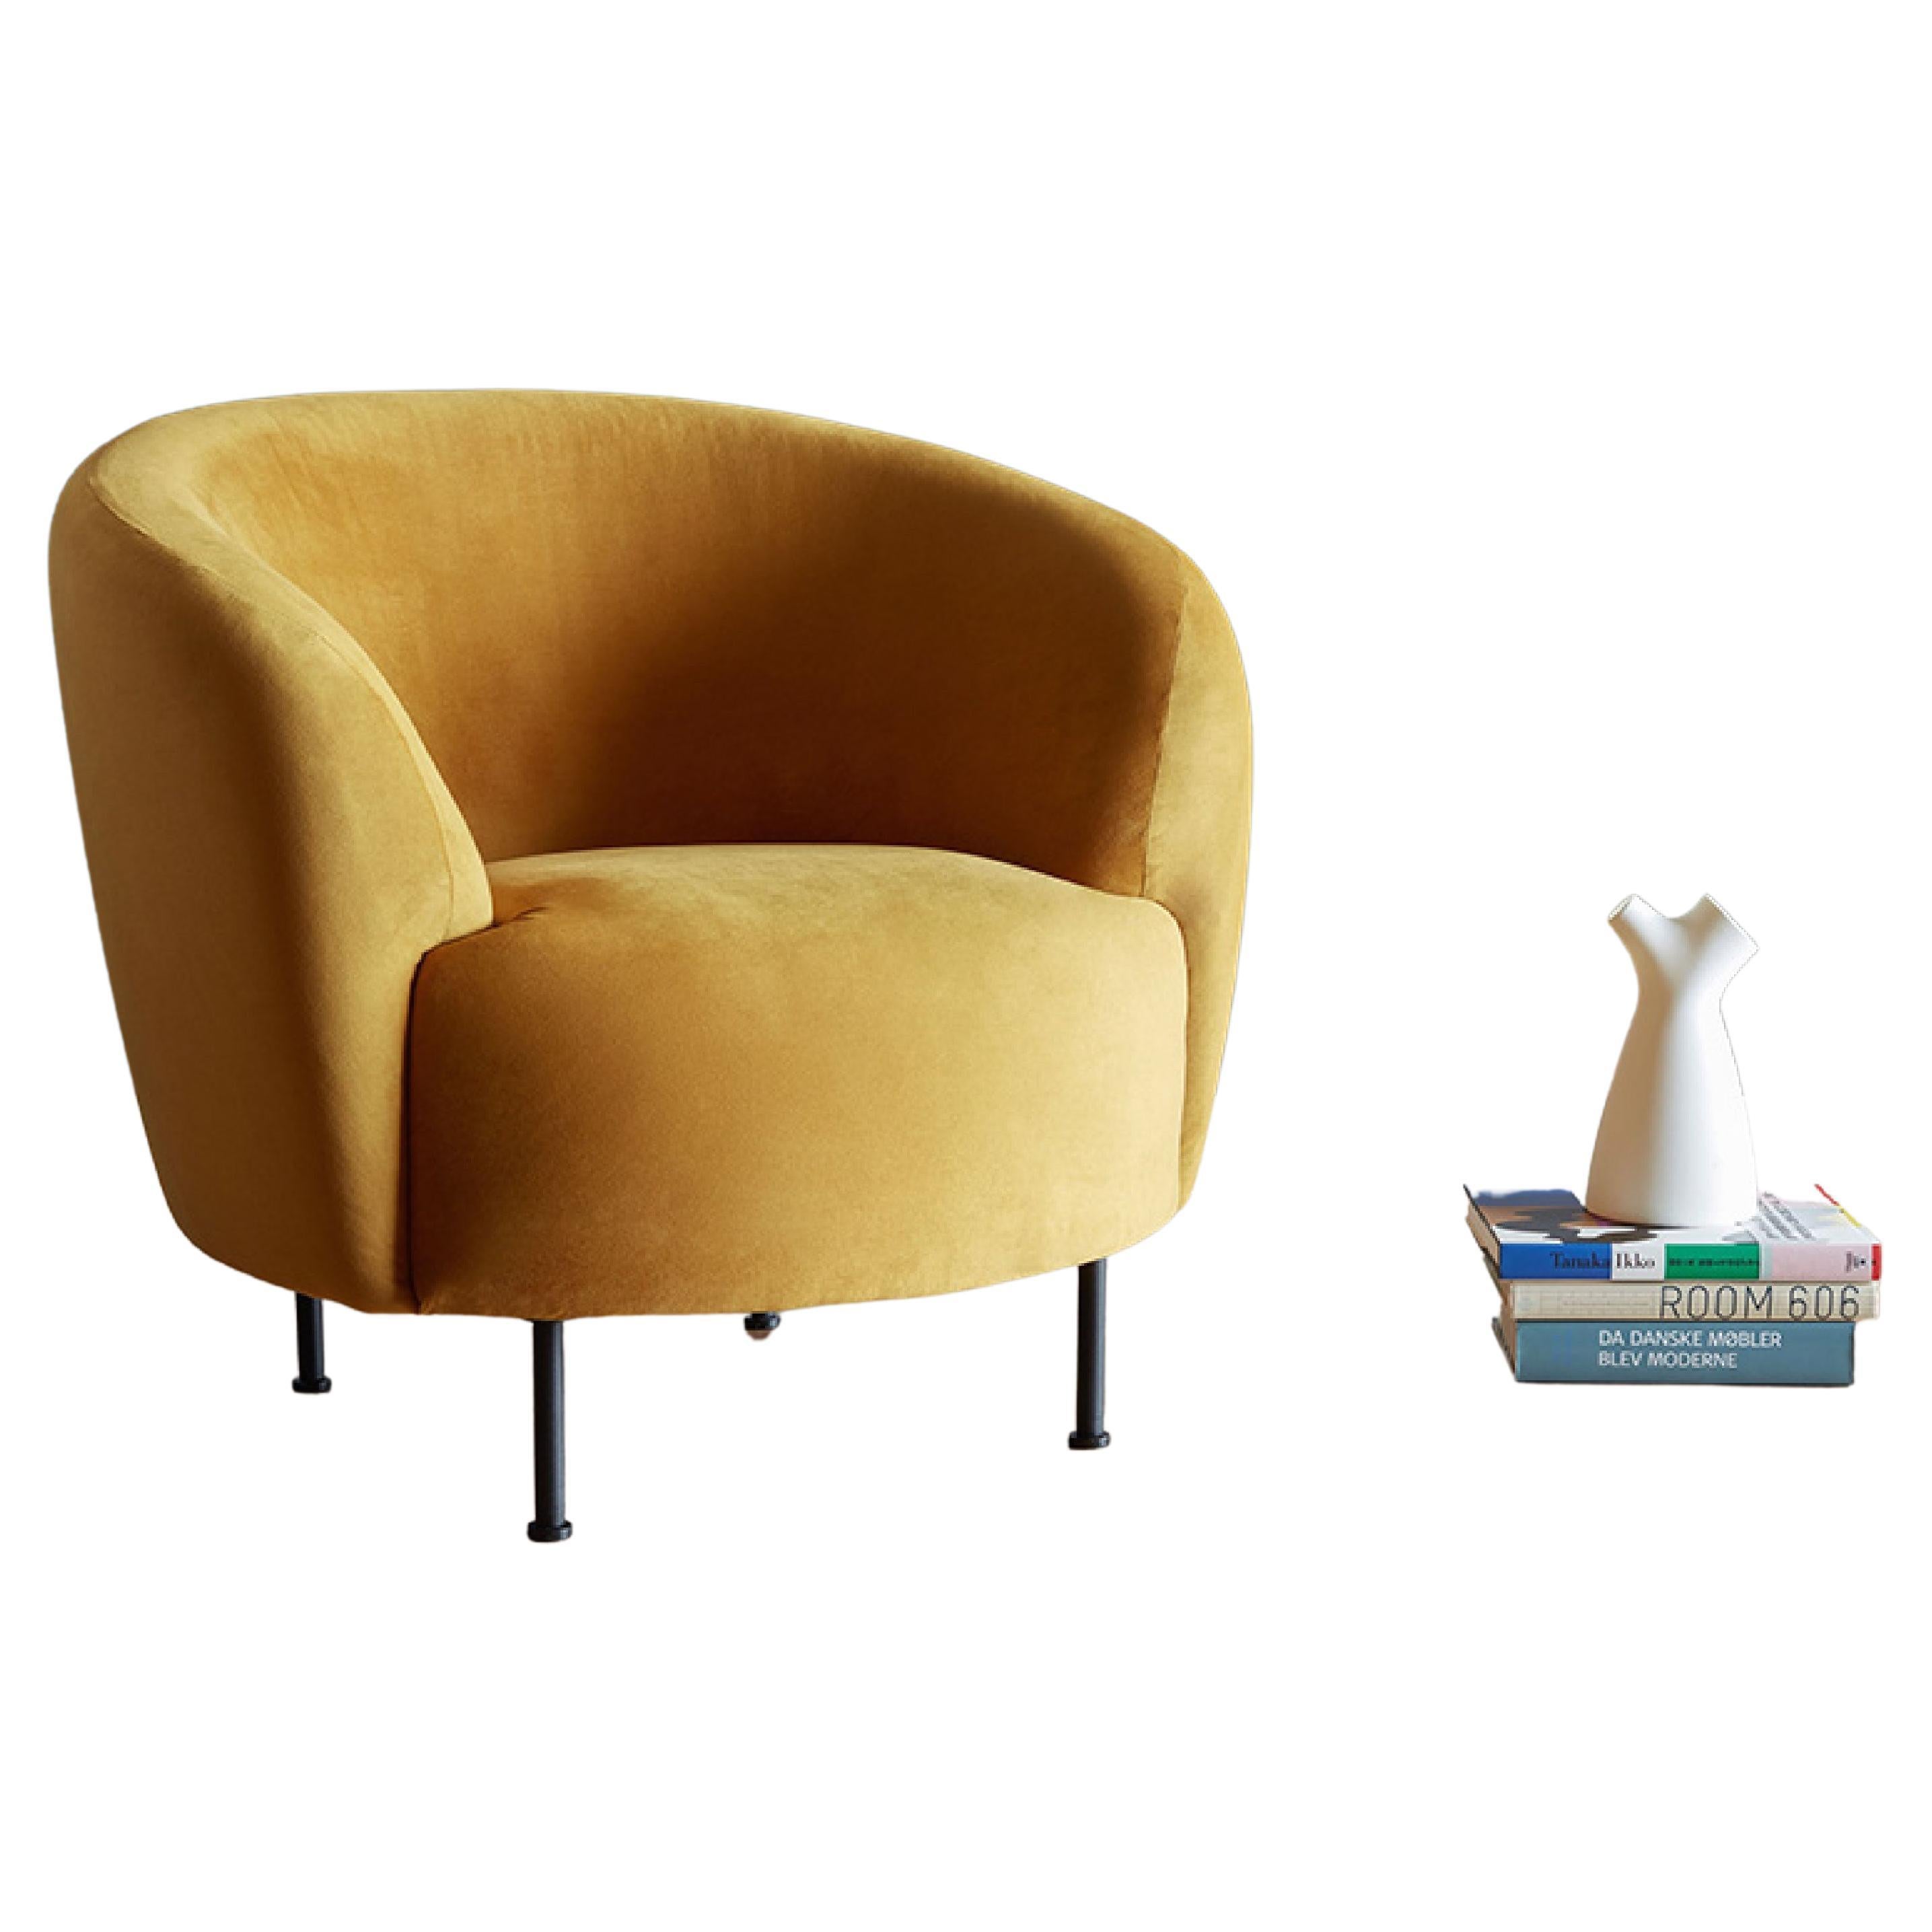 Hayche Glover Armchair - Metal Legs - Yellow, UK, Made to Order